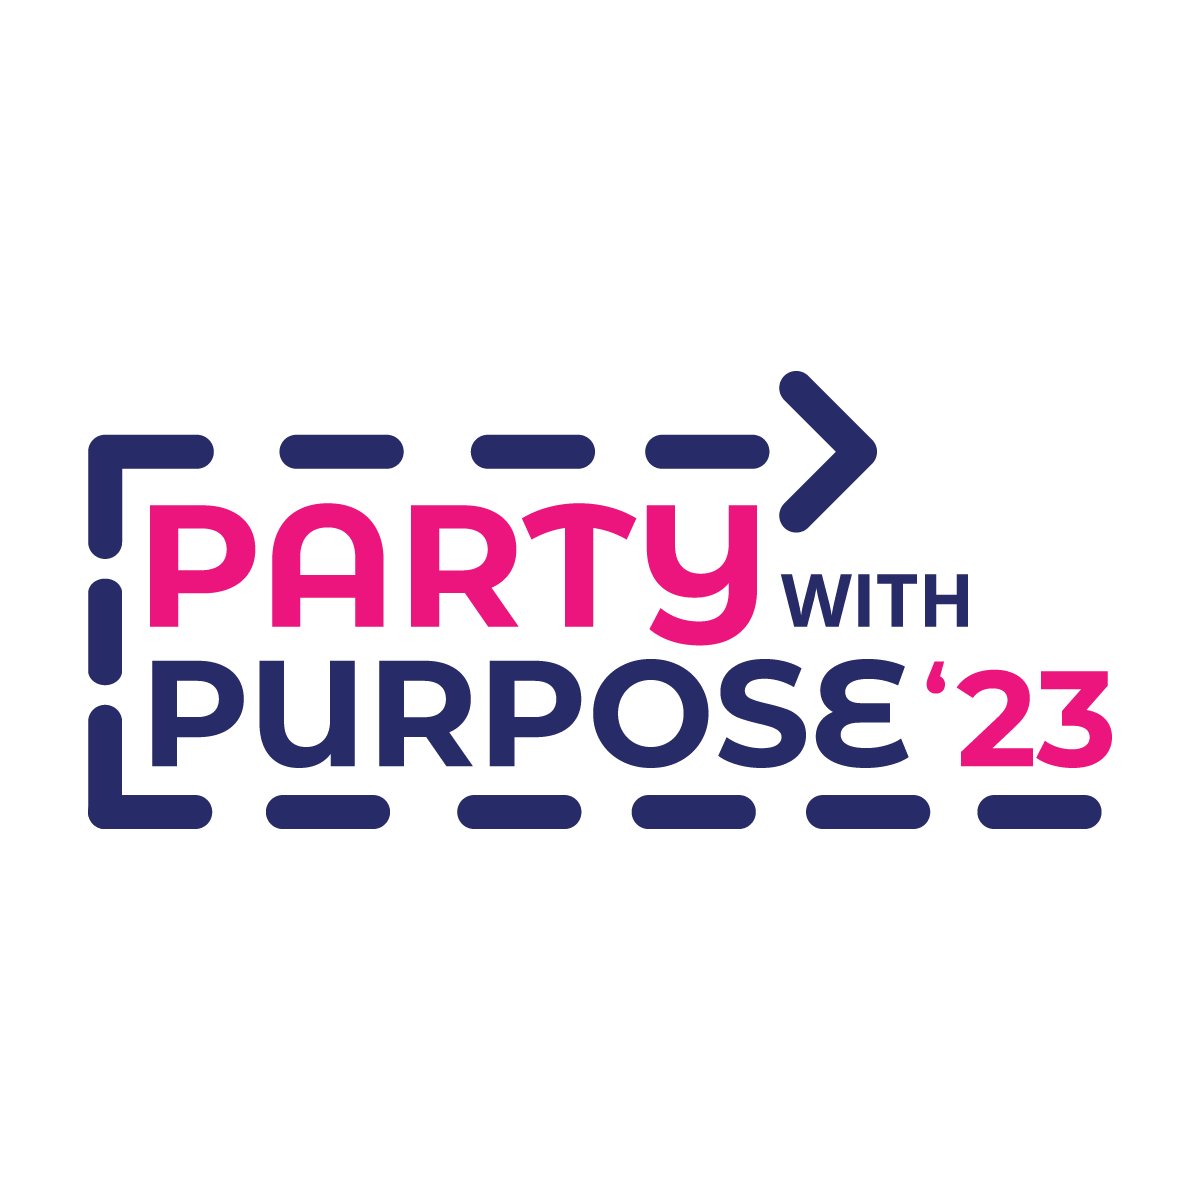 It's Here: Party with Purpose 2023!